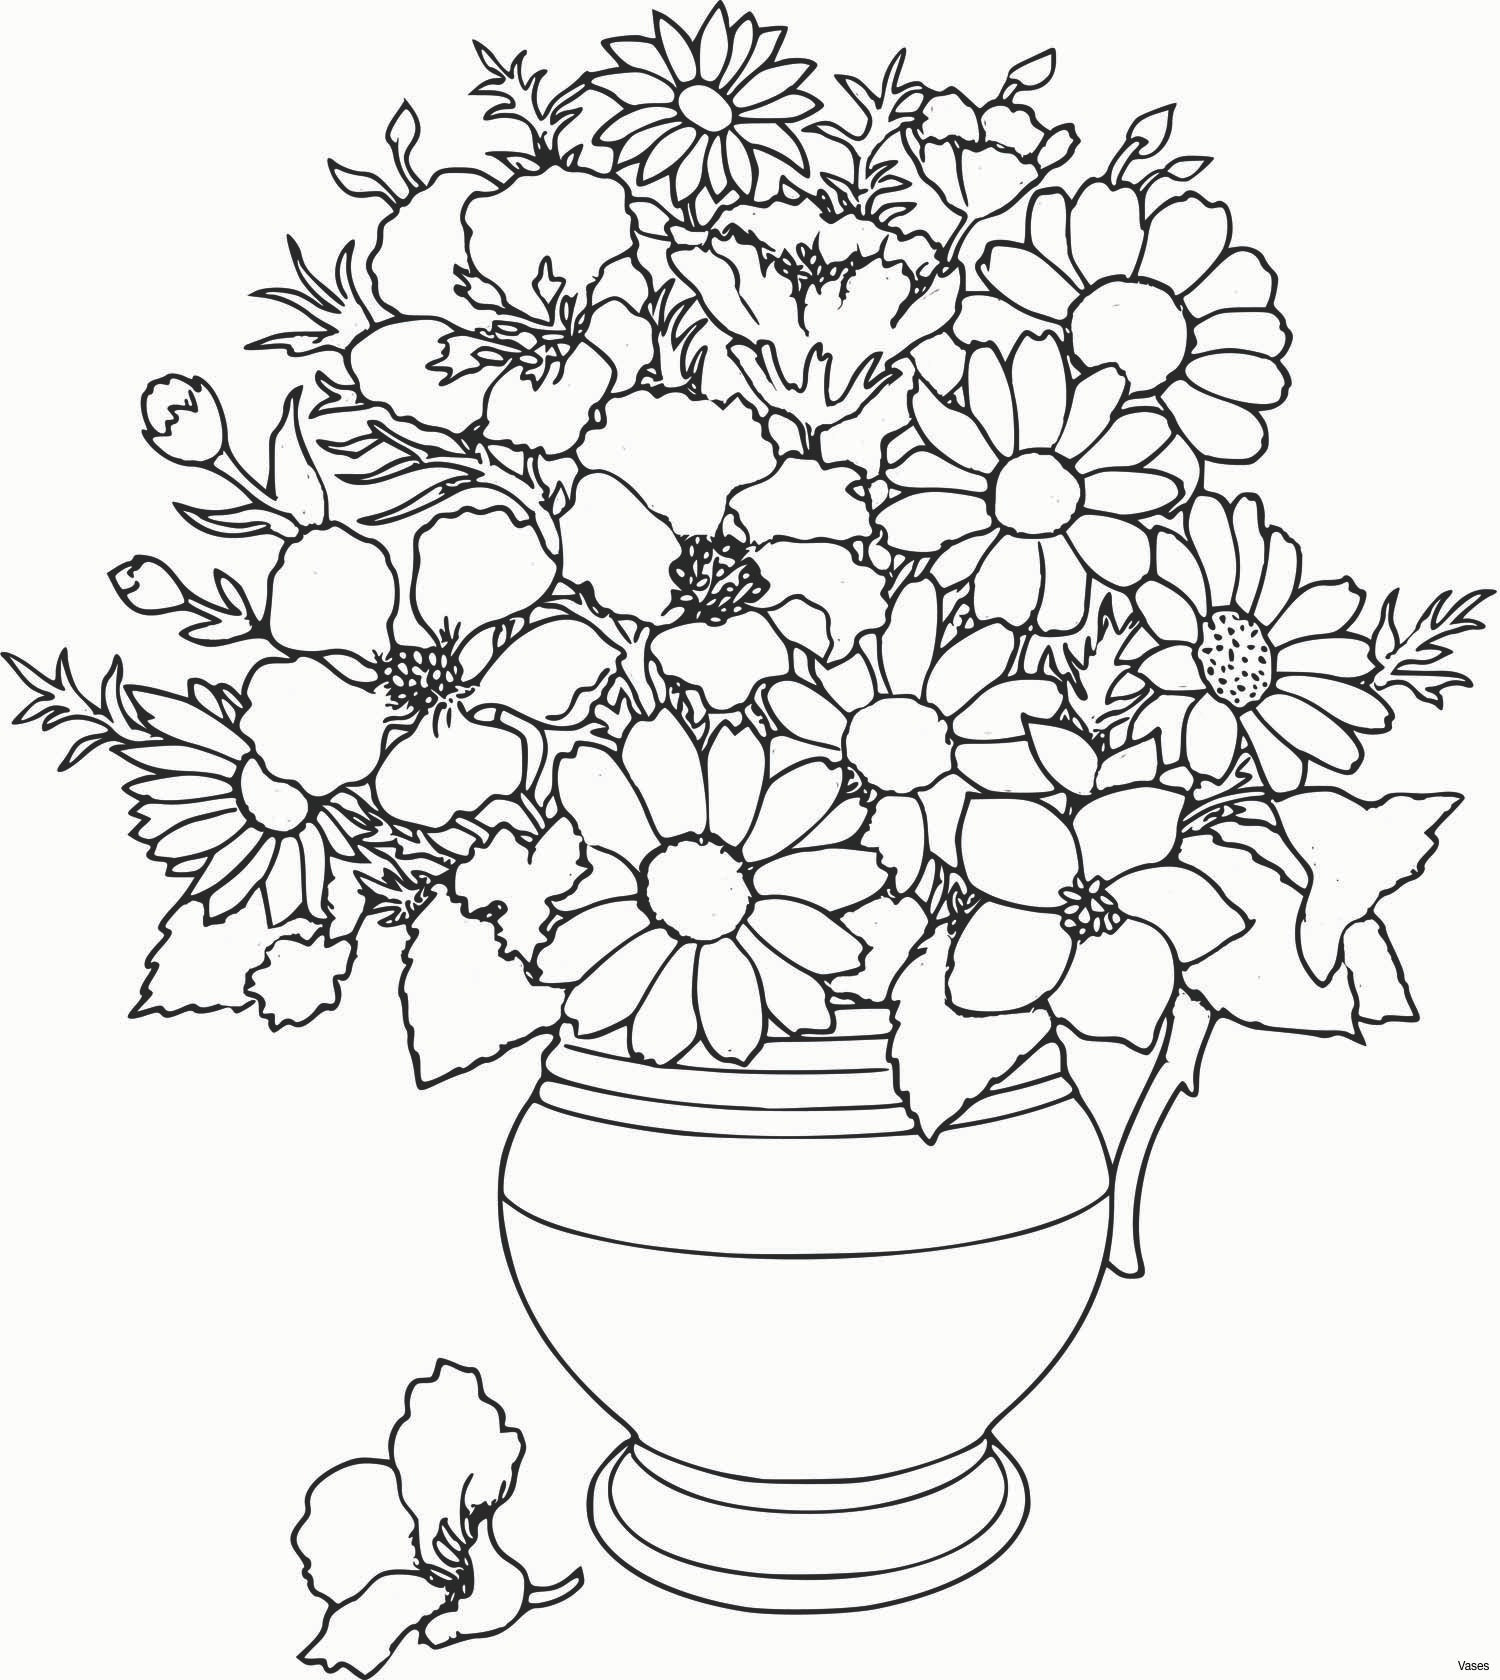 15 Fabulous White Flowers In Glass Vase 2024 free download white flowers in glass vase of unique flowers with vases beginneryogaclassesnear me intended for coloring pages roses new vases flower vase coloring page pages flowers in a top i 0d